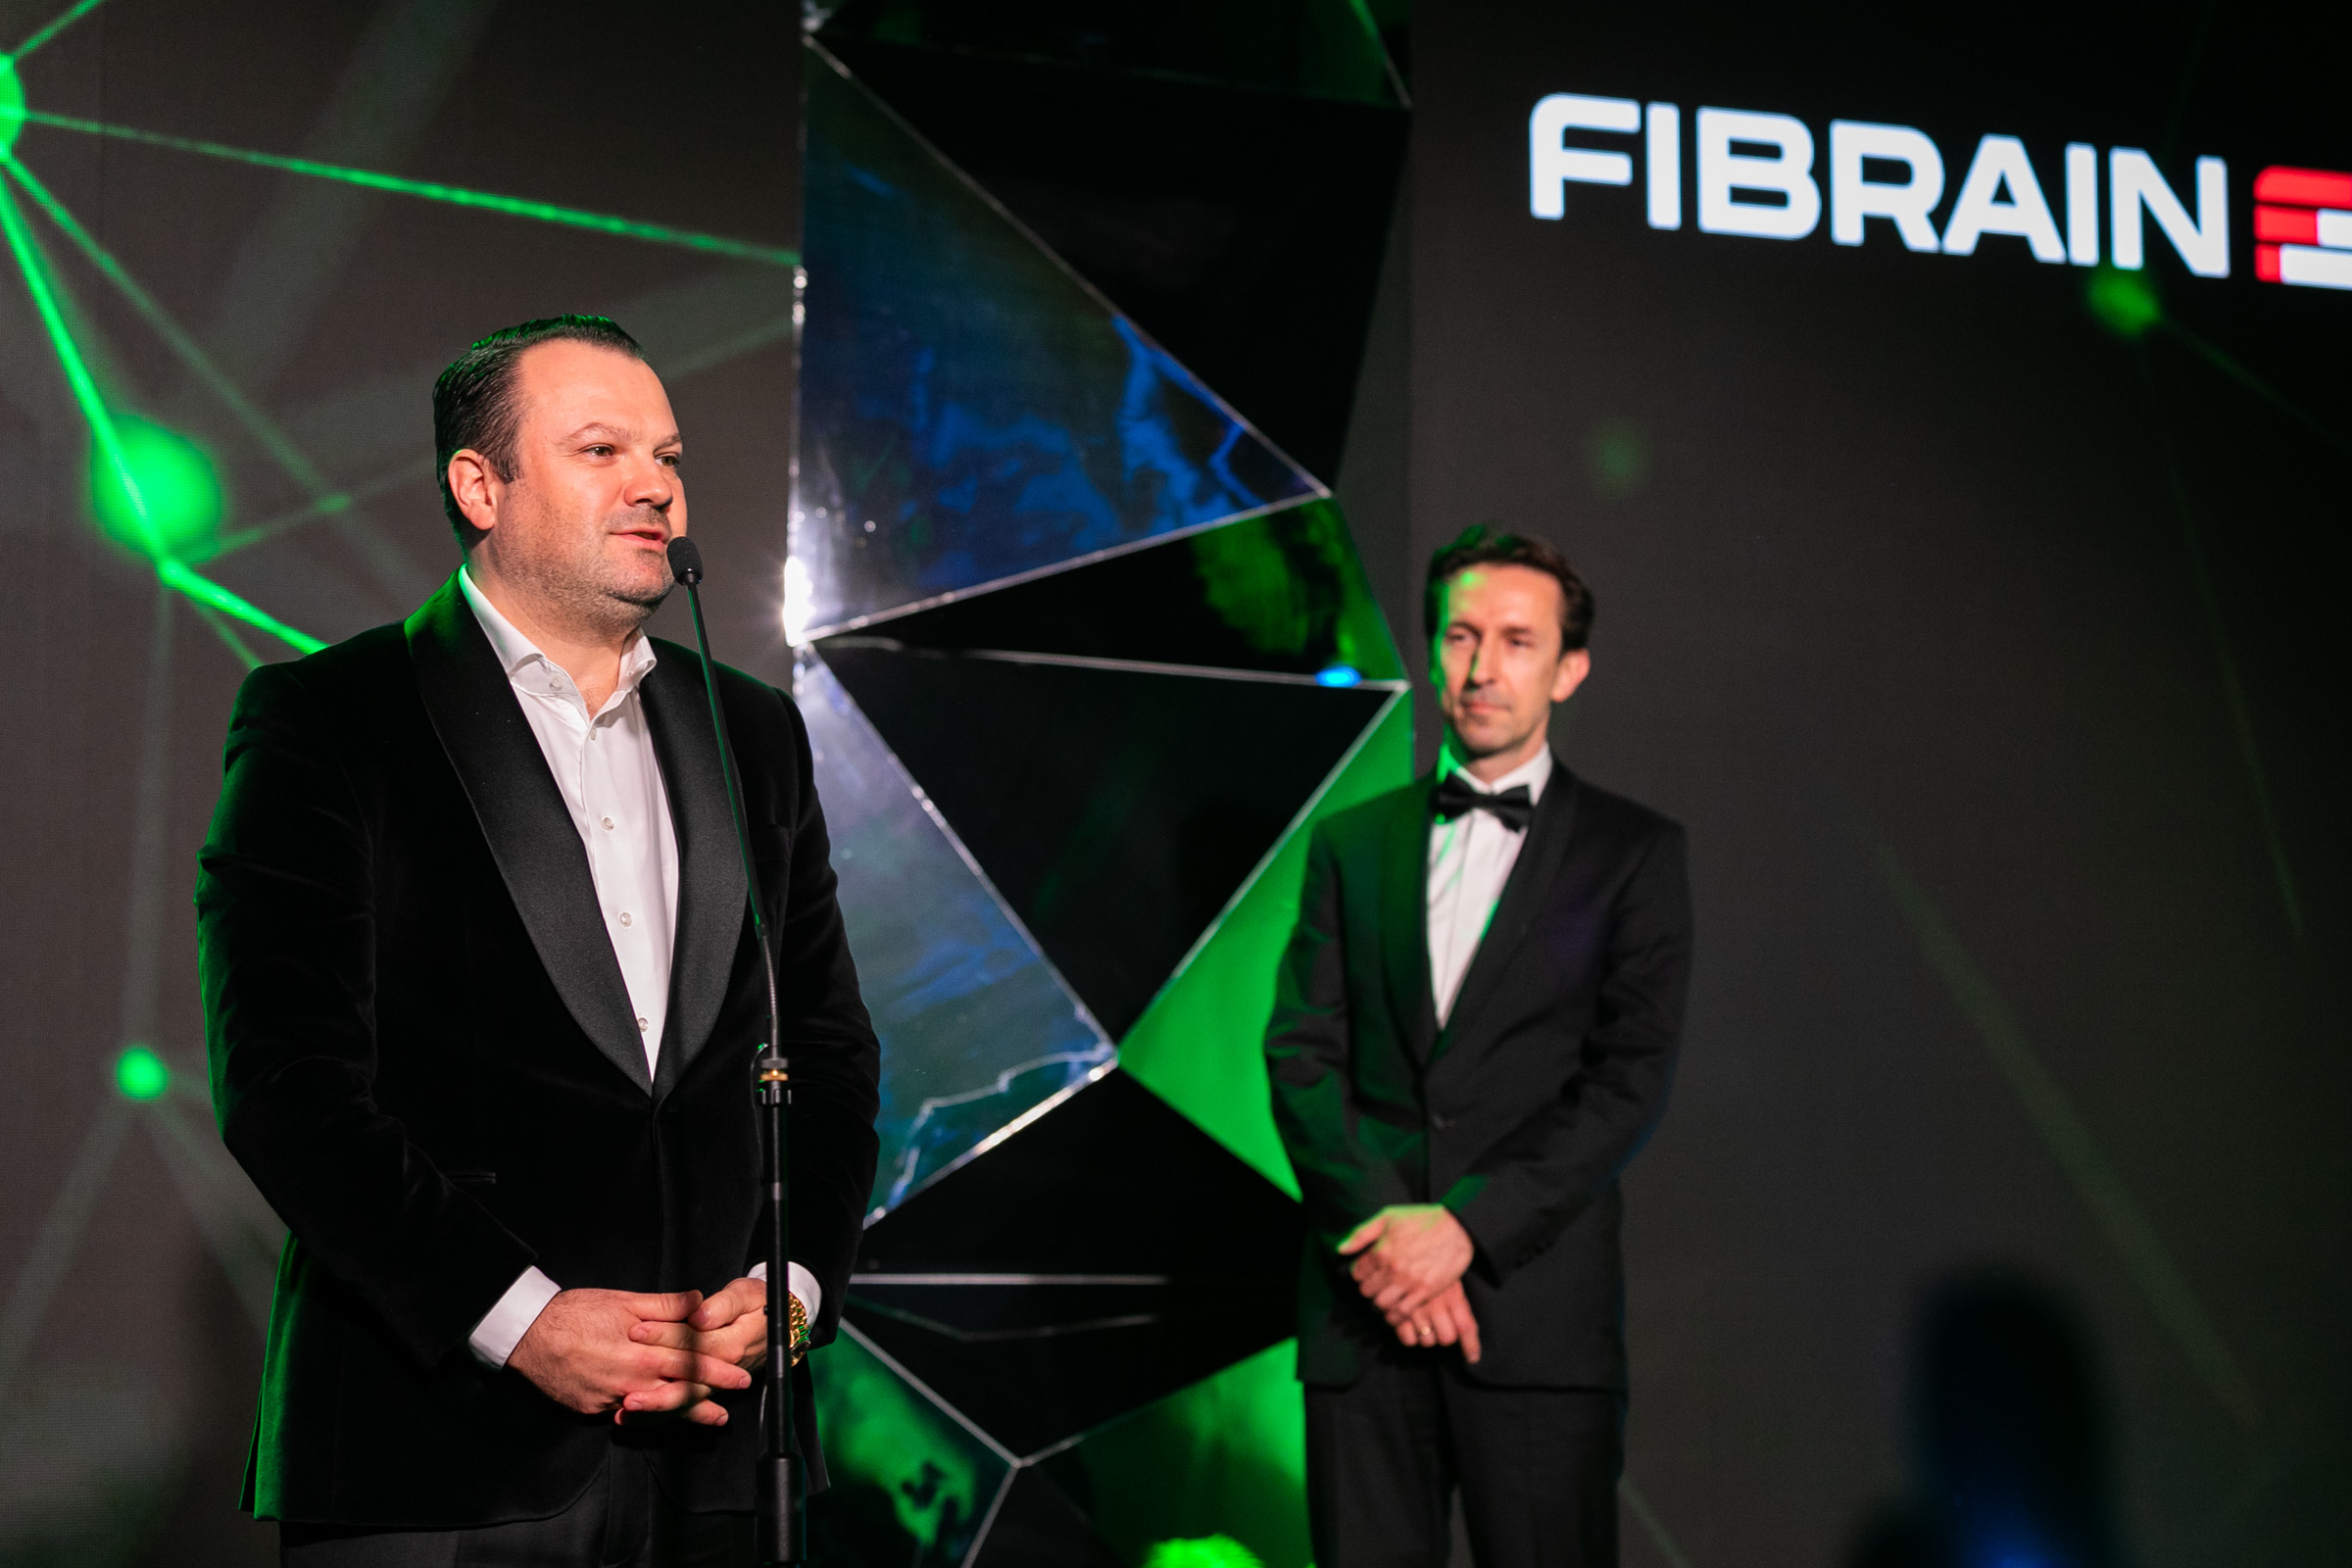 FIBRAIN among the Best Managed Companies in Poland!